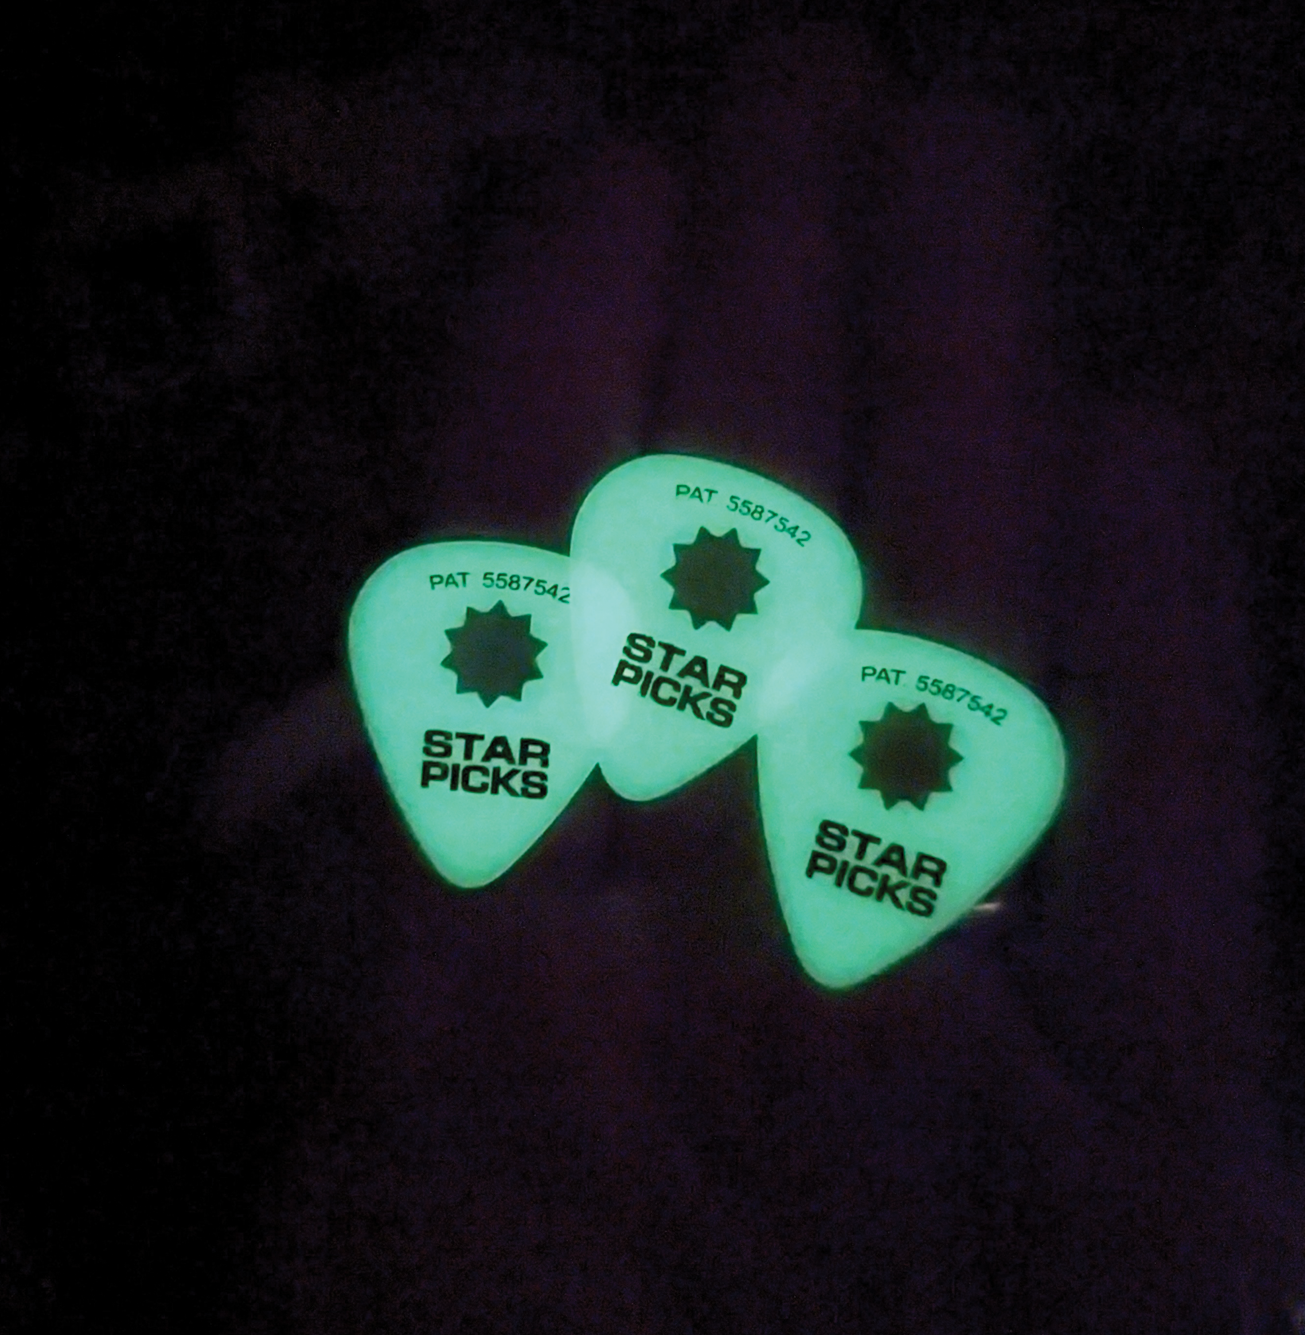 Glow in the Dark Guitar Picks - Don't Lose Your Pick!